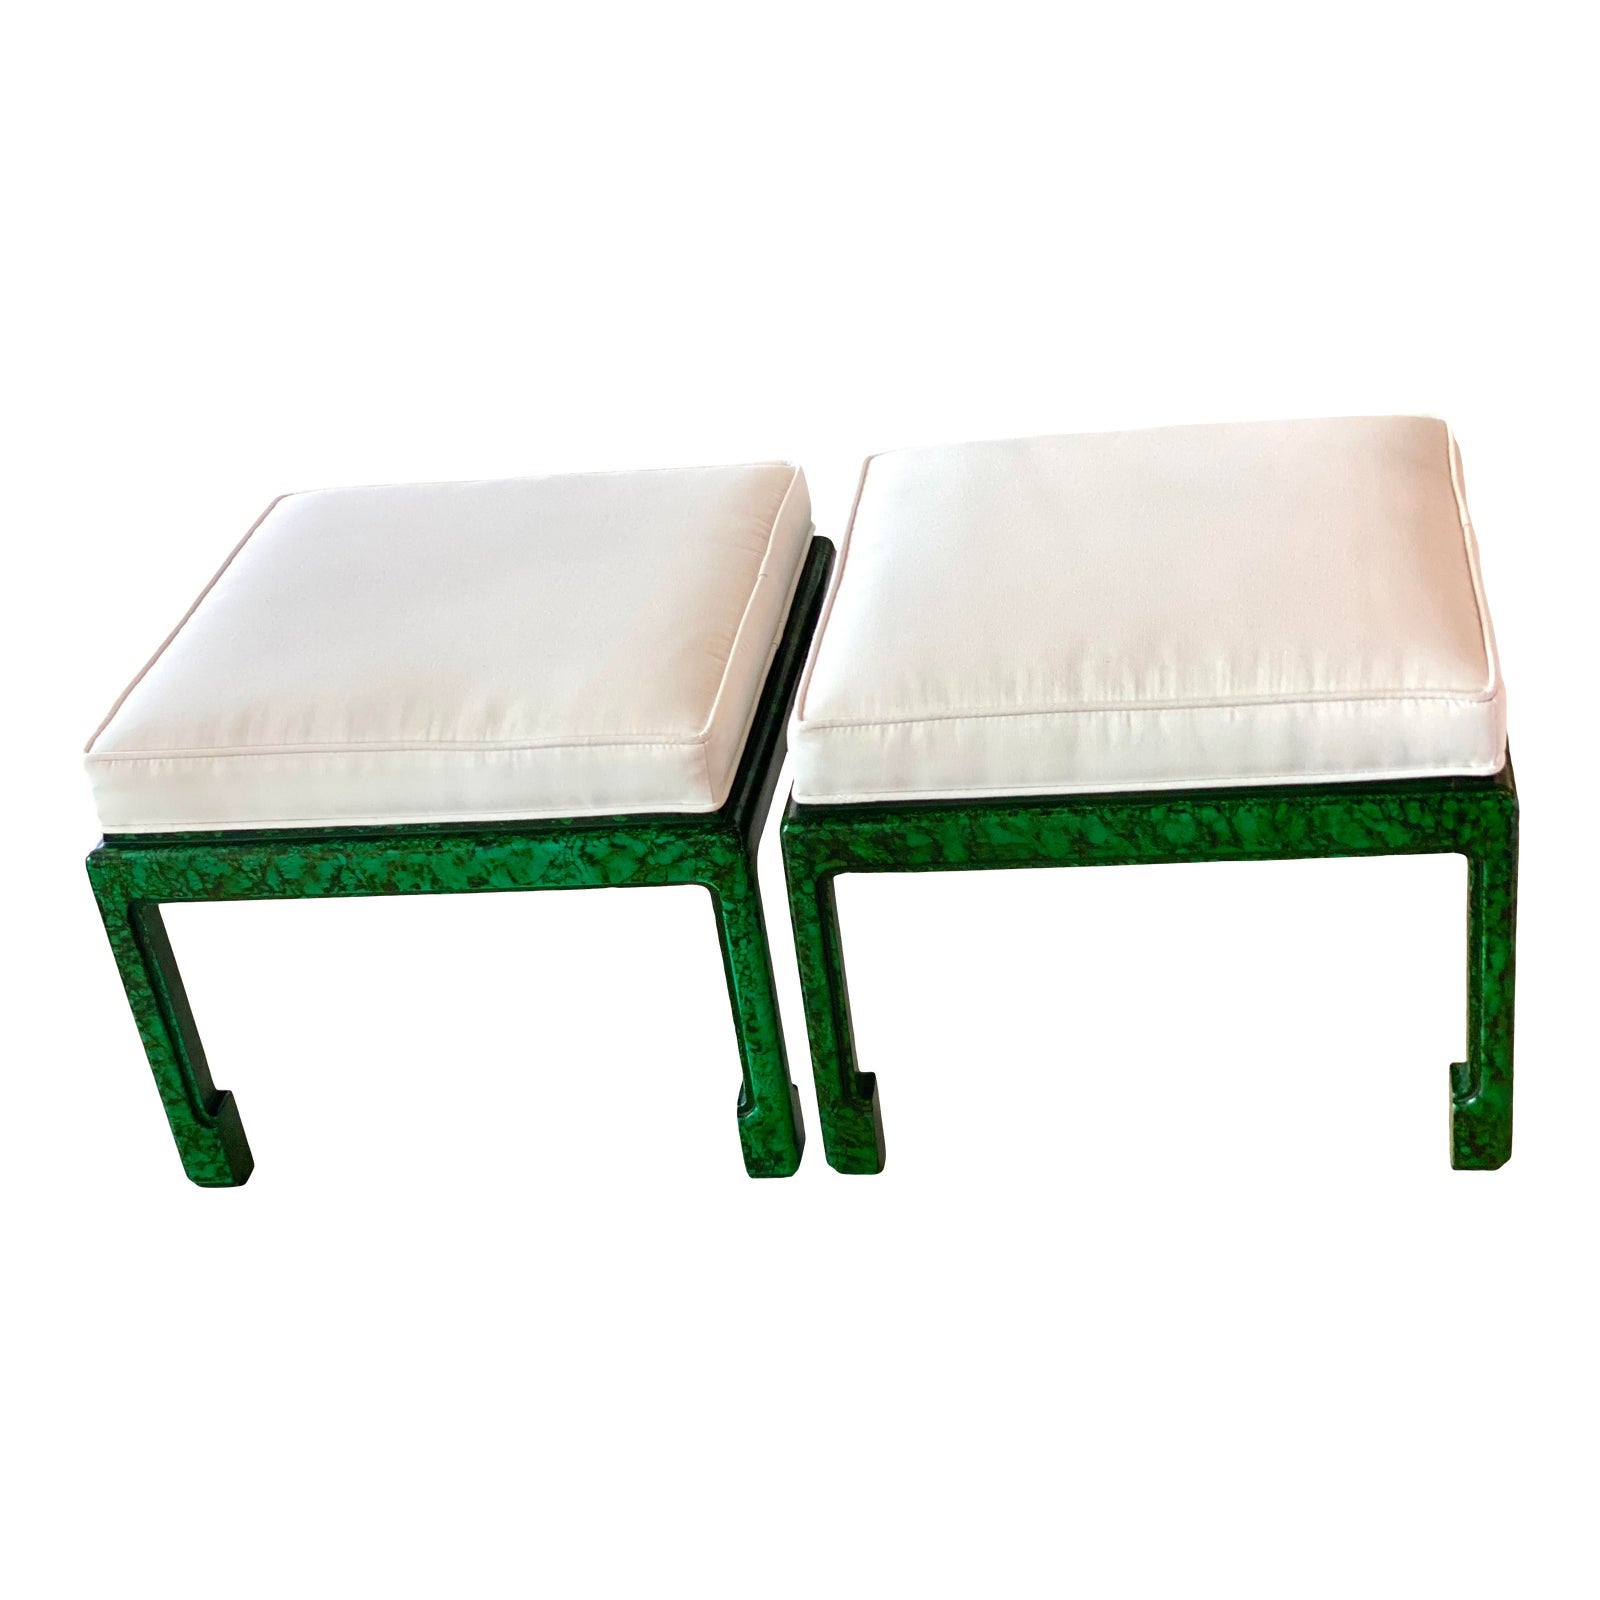 To say these are amazing is putting it lightly! Beautiful vintage pair of faux malachite wood benches, stools, ottomans. Completely restored with all new cushions, including foam, done in a durable sunbrella upholstery with matching welt. At time of